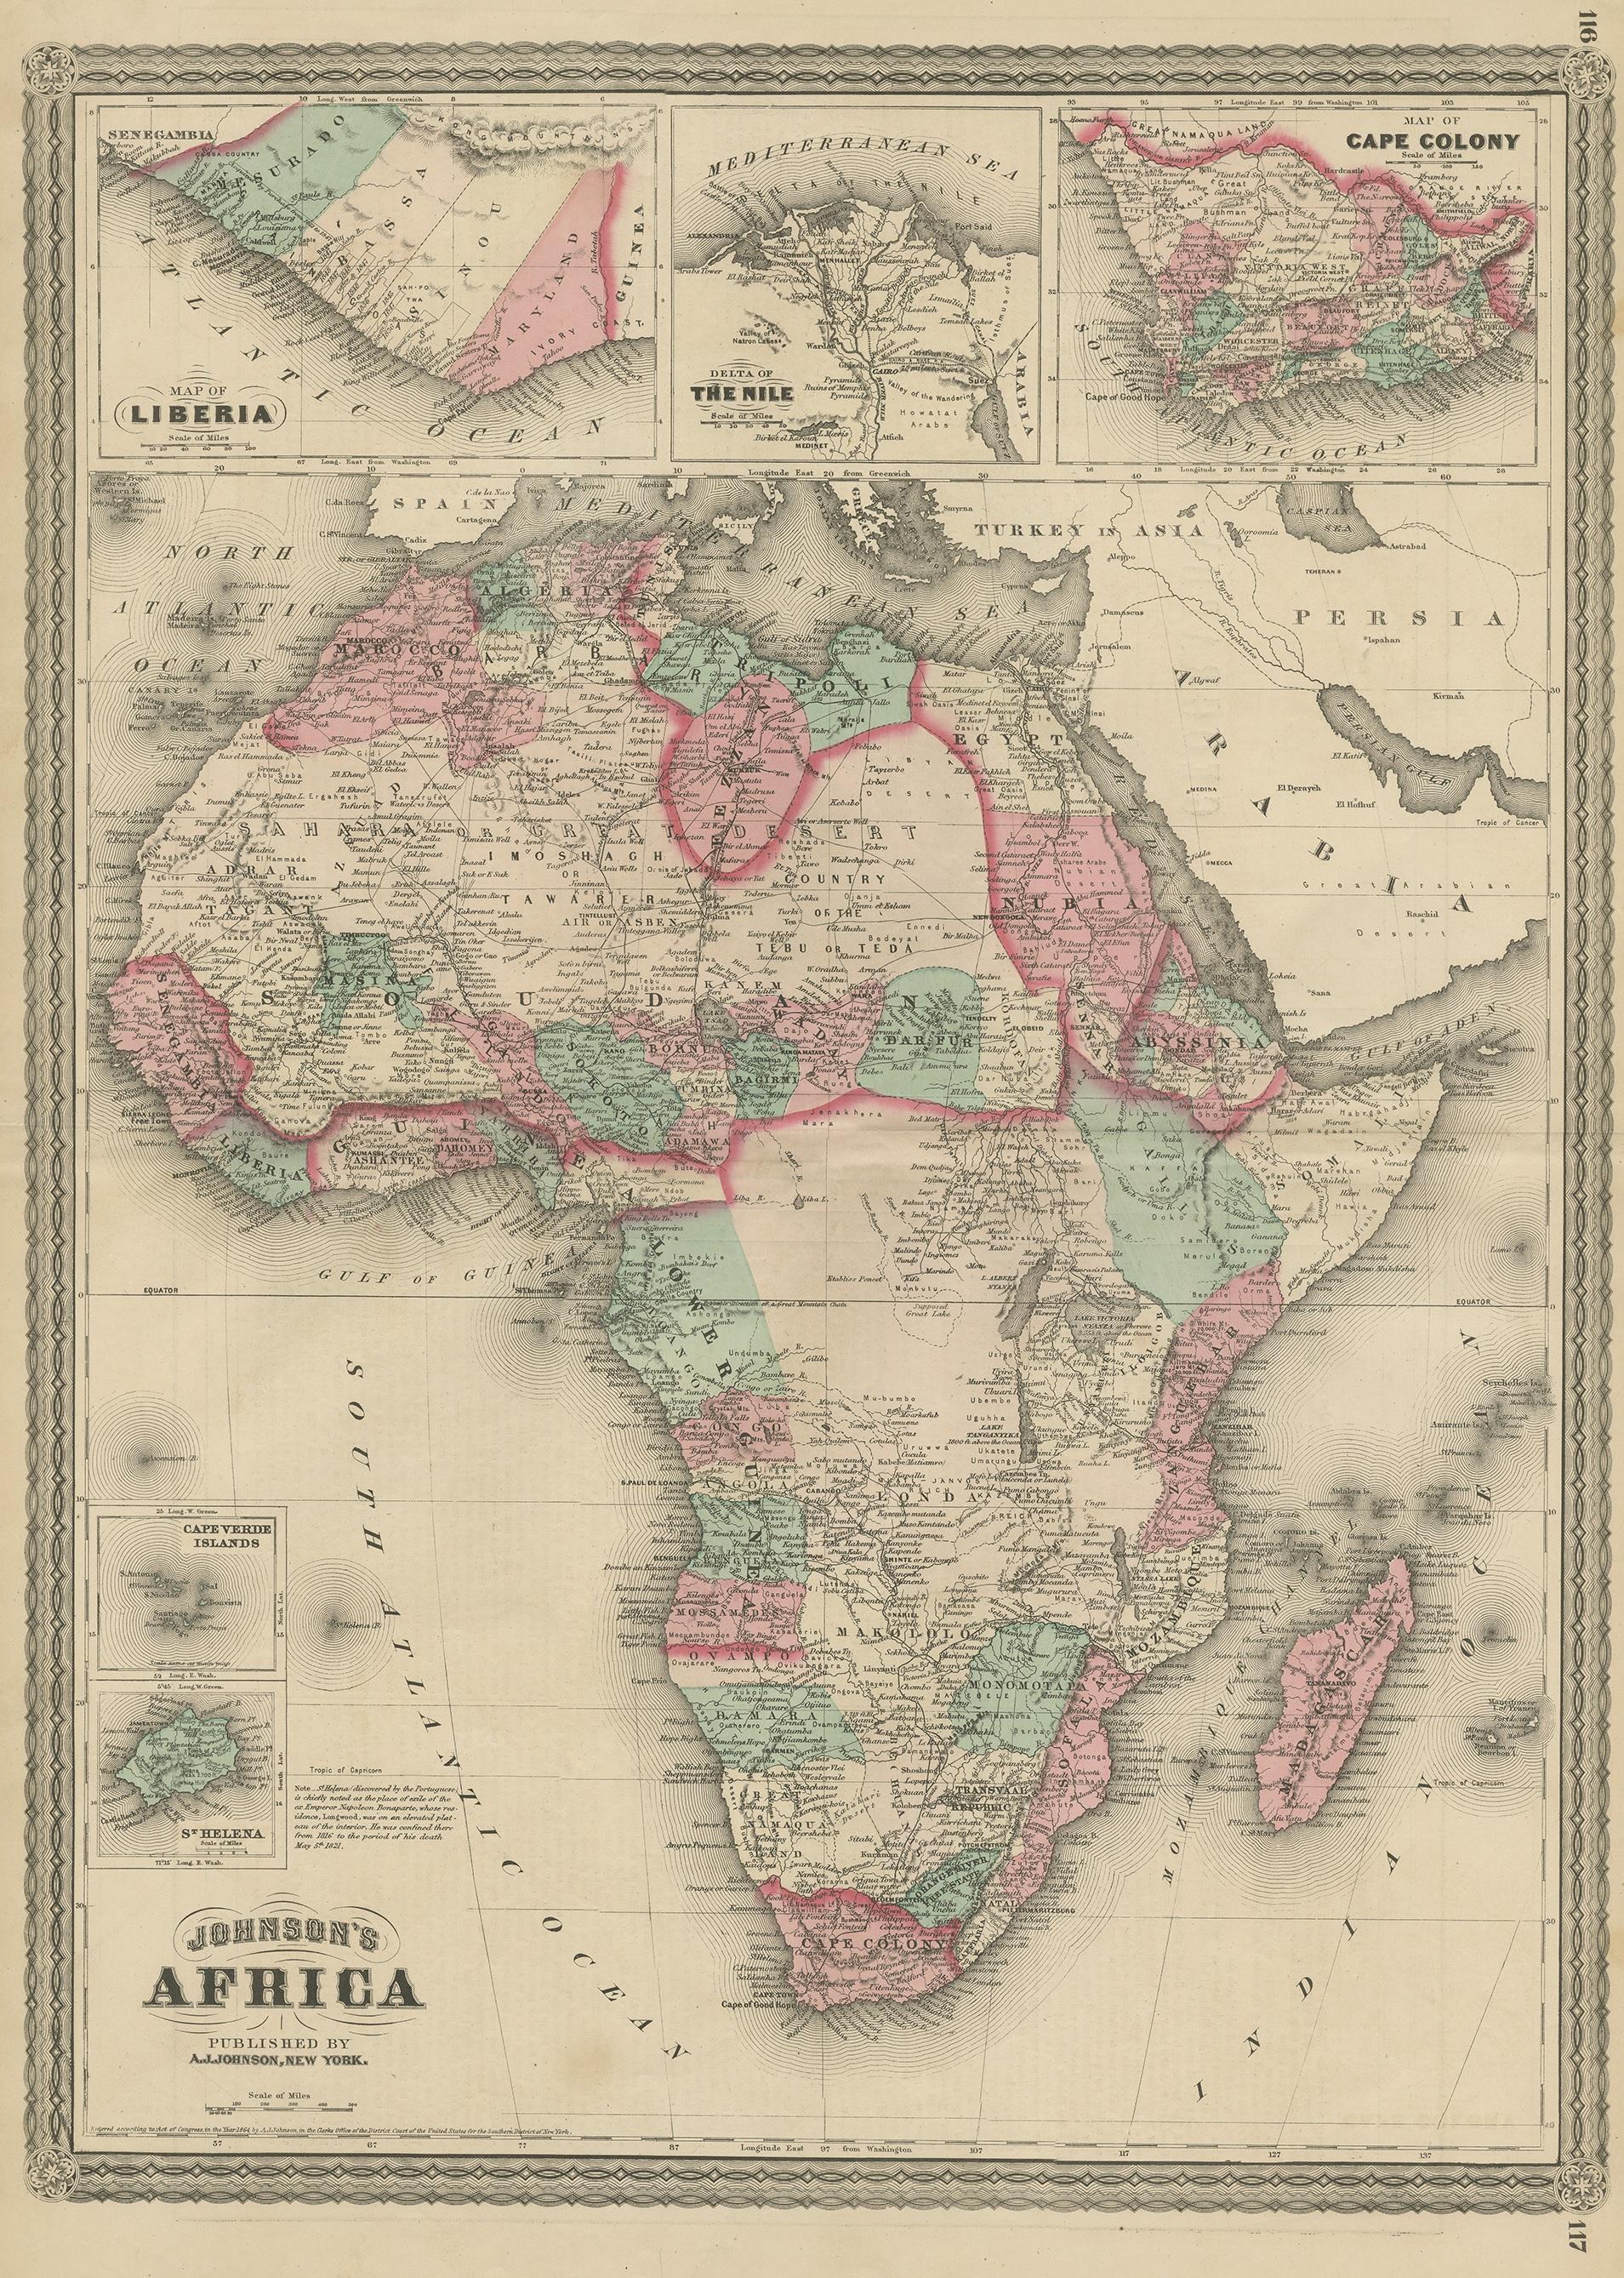 Antique map titled 'Johnson's Africa'. Original map of Africa, with inset maps of Liberia, the delta of the Nile, Cape Colony, Cape Verde Islands and St. Helena. This map originates from 'Johnson's New Illustrated Family Atlas of the World' by A.J.